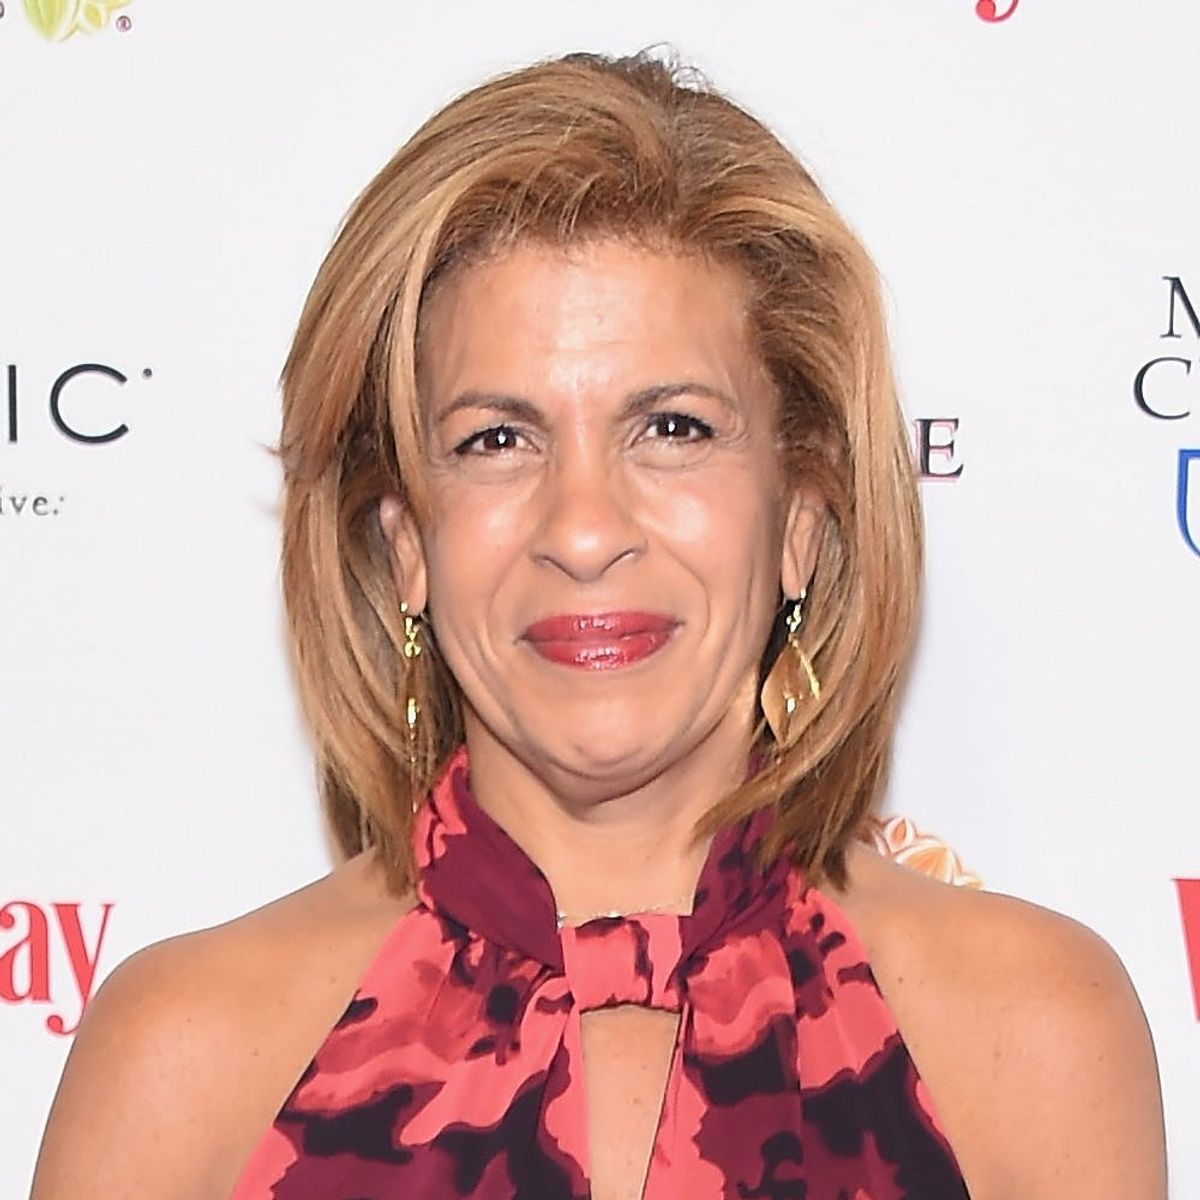 Hoda Kotb Reveals She’s Adopted a Baby Girl With a Name That Evokes Pure “Joy”